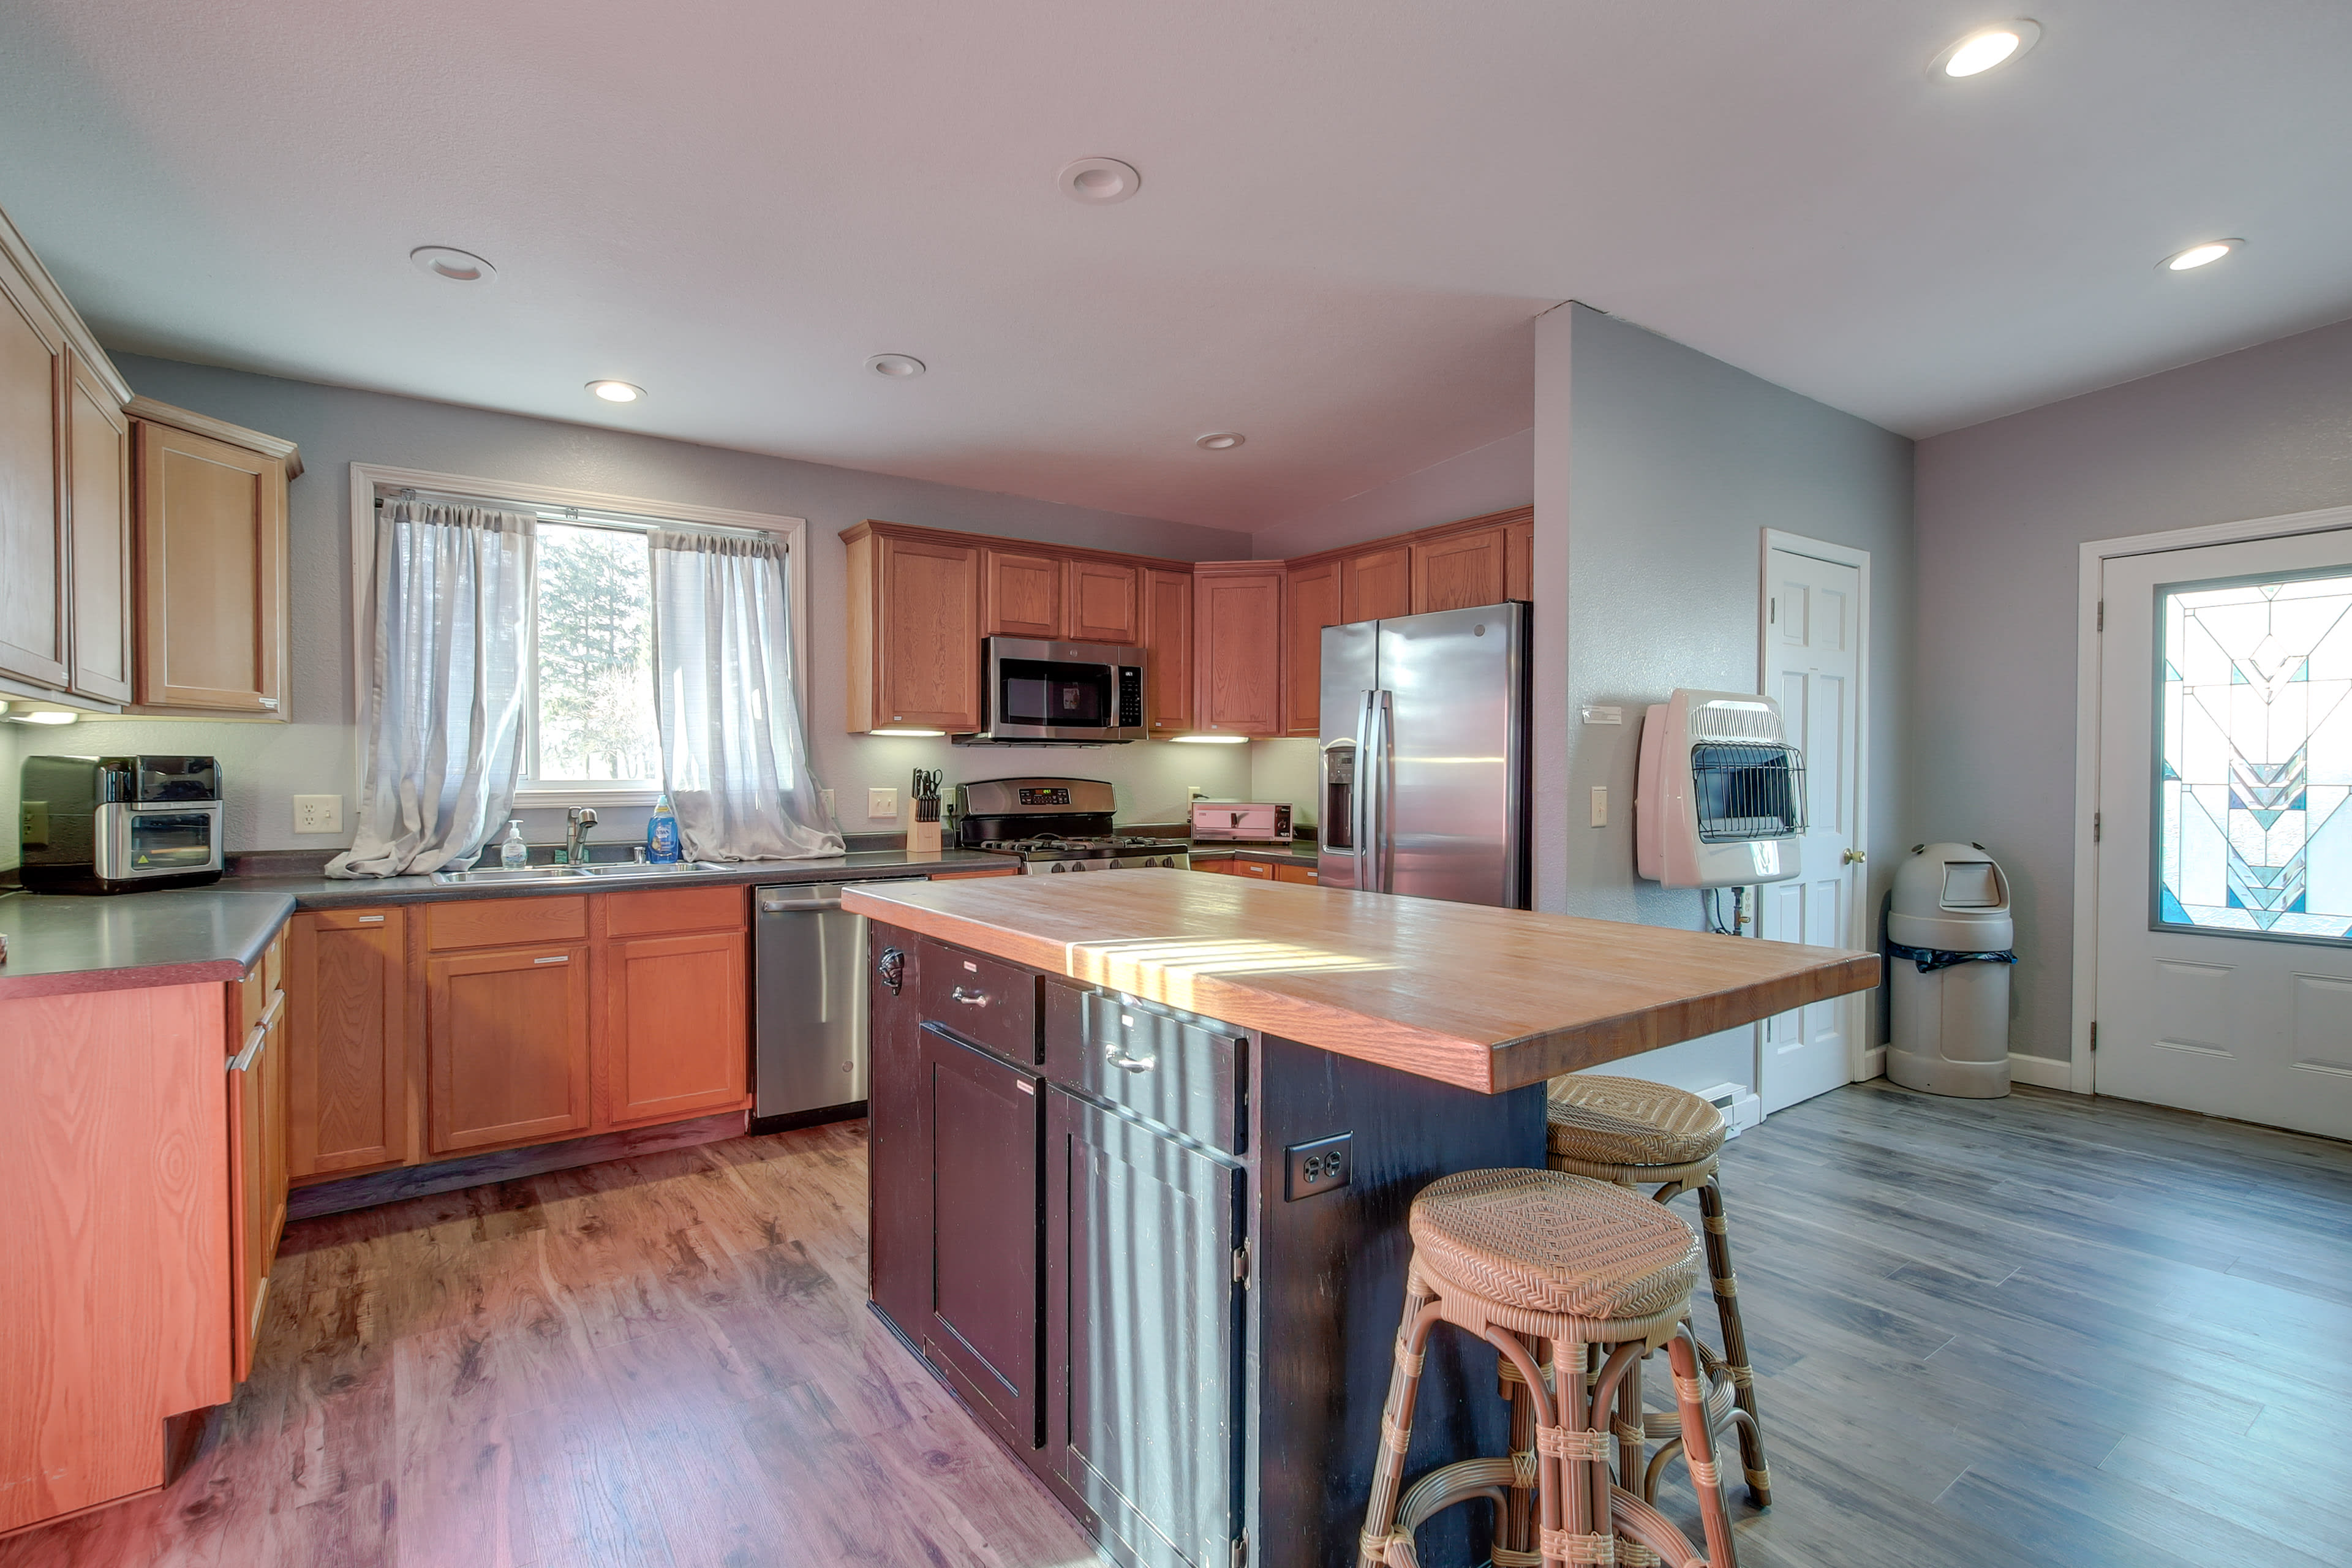 Fully Equipped Kitchen | Stainless Steel Appliances Provided